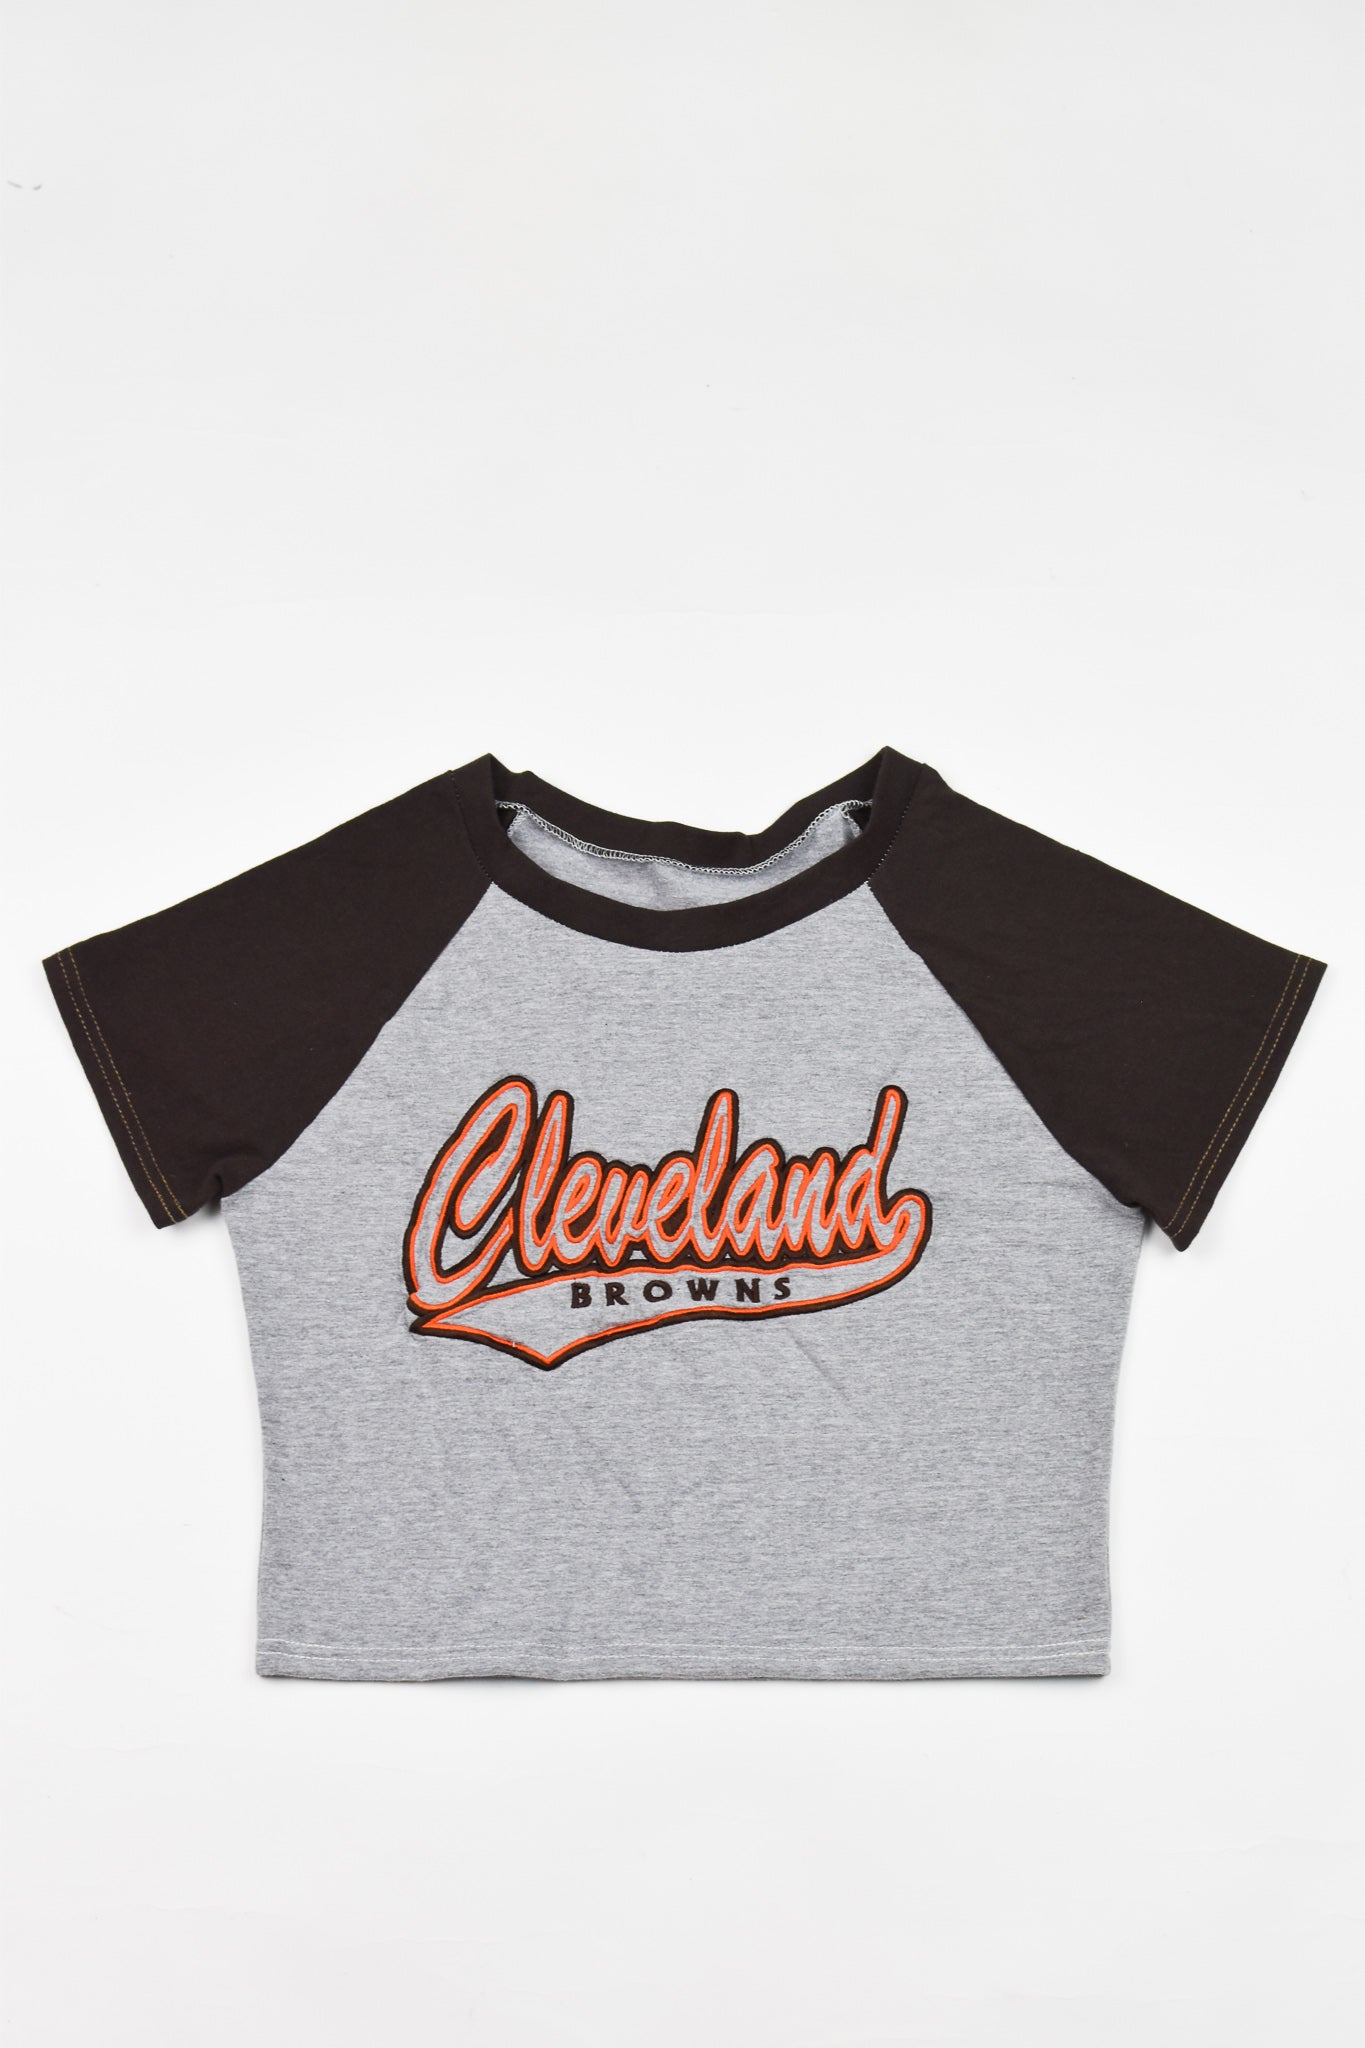 Upcycled Browns Baby Tee